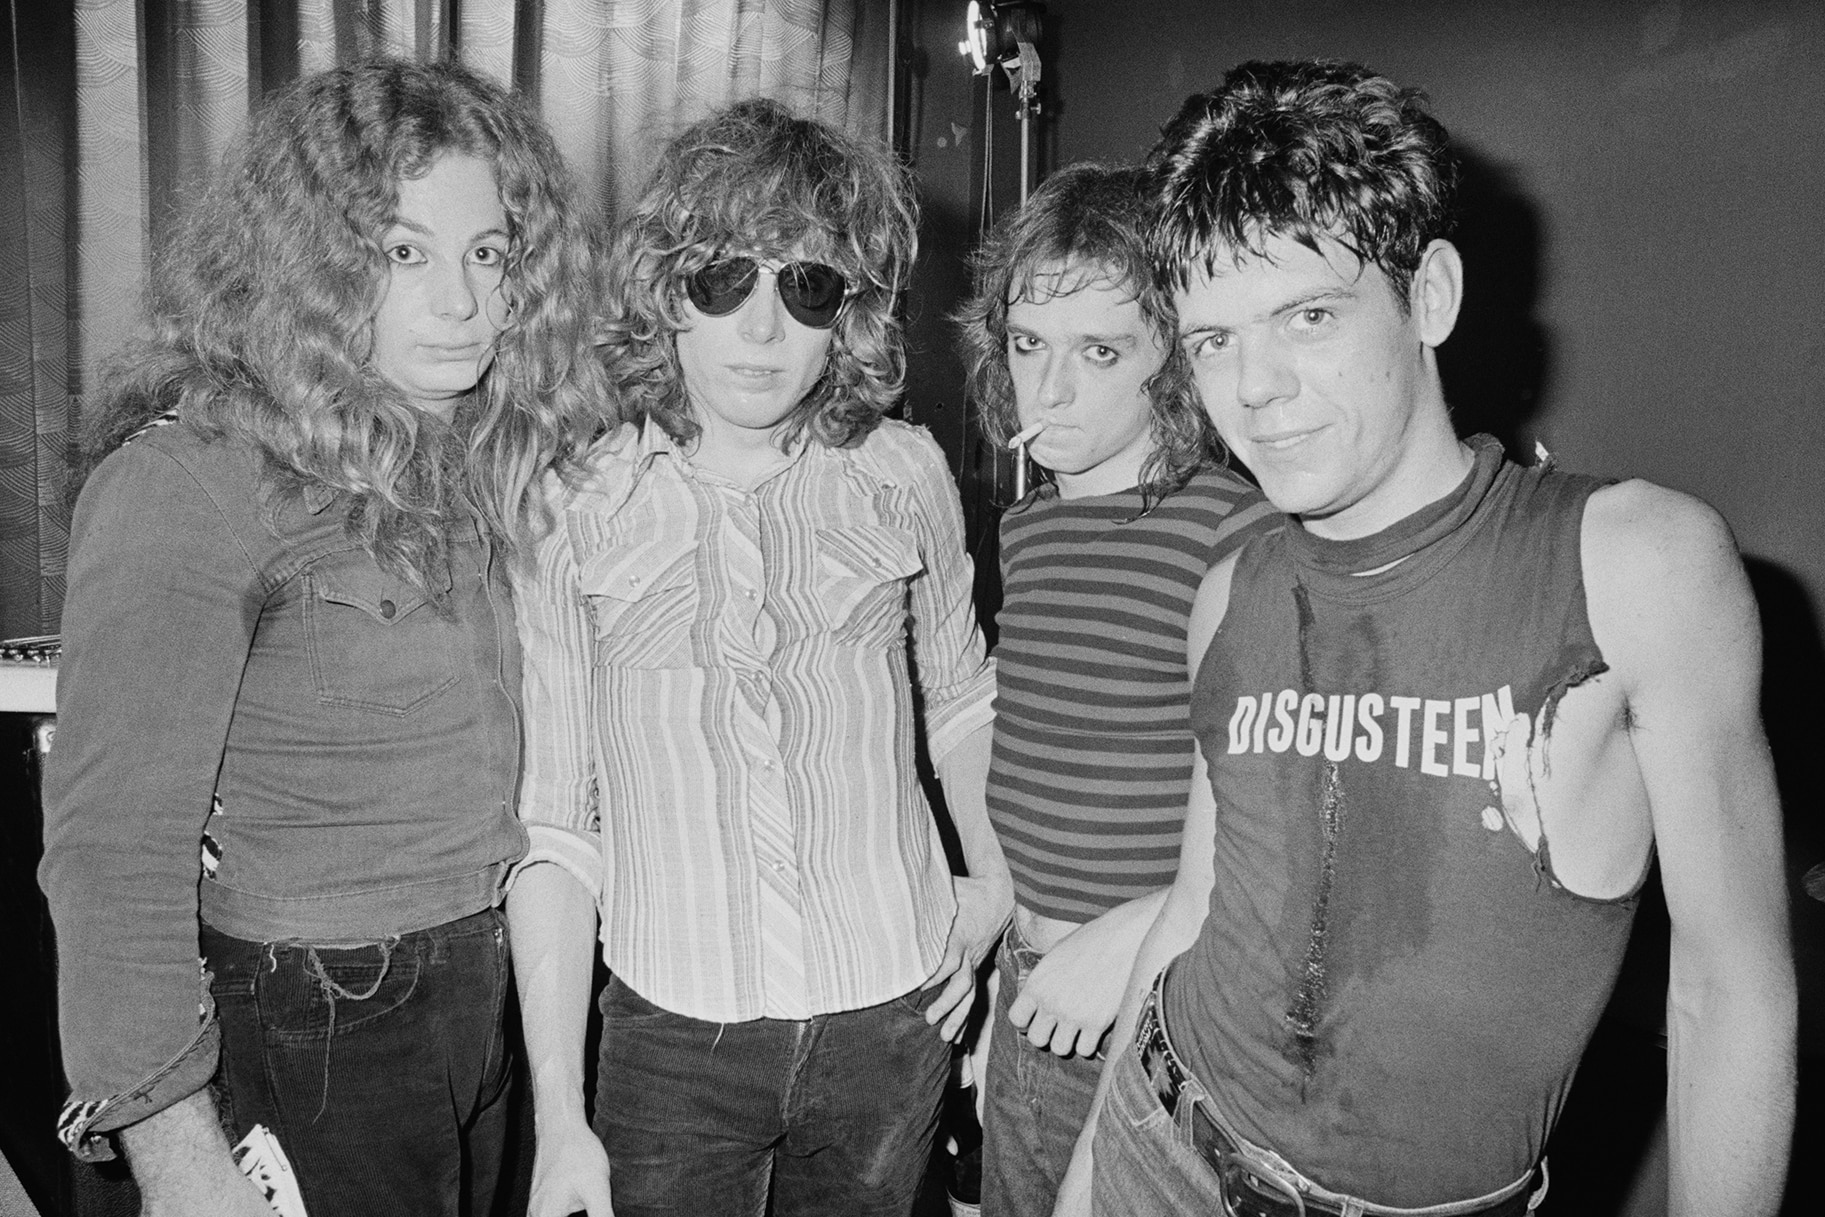 Canadian punk band Teenage Head backstage at a club in Toronto